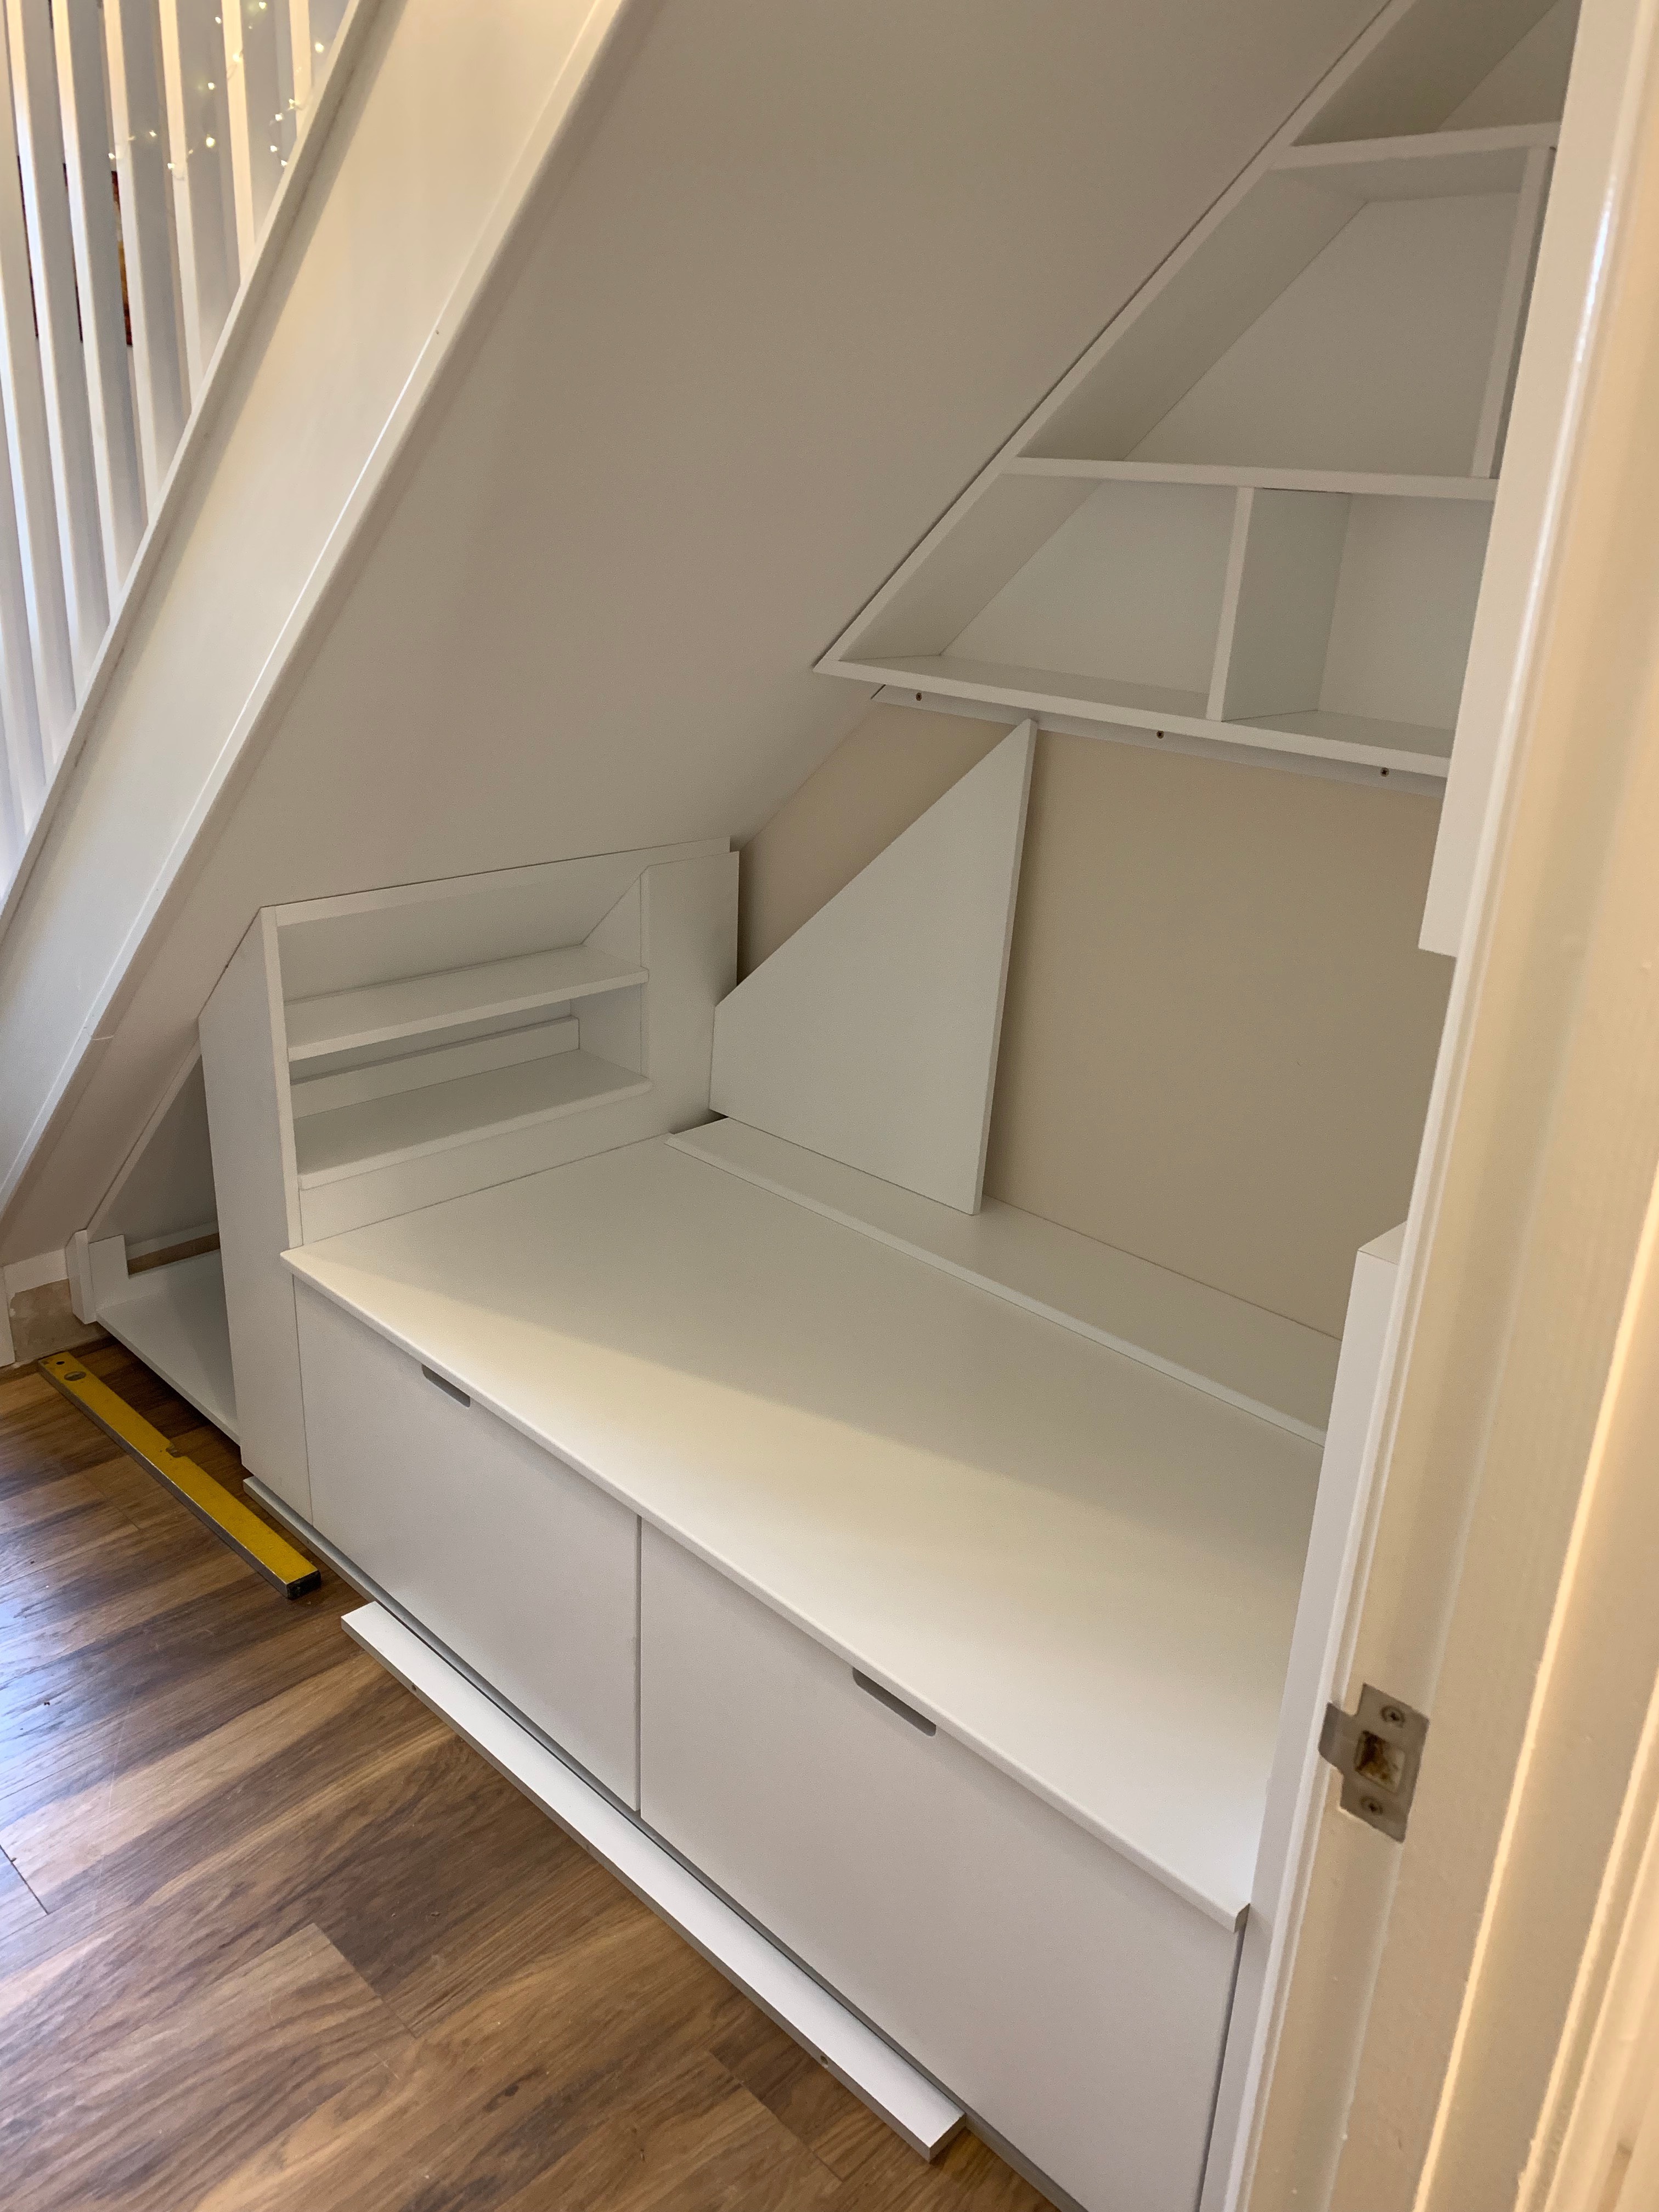 Under stairs seating and storage